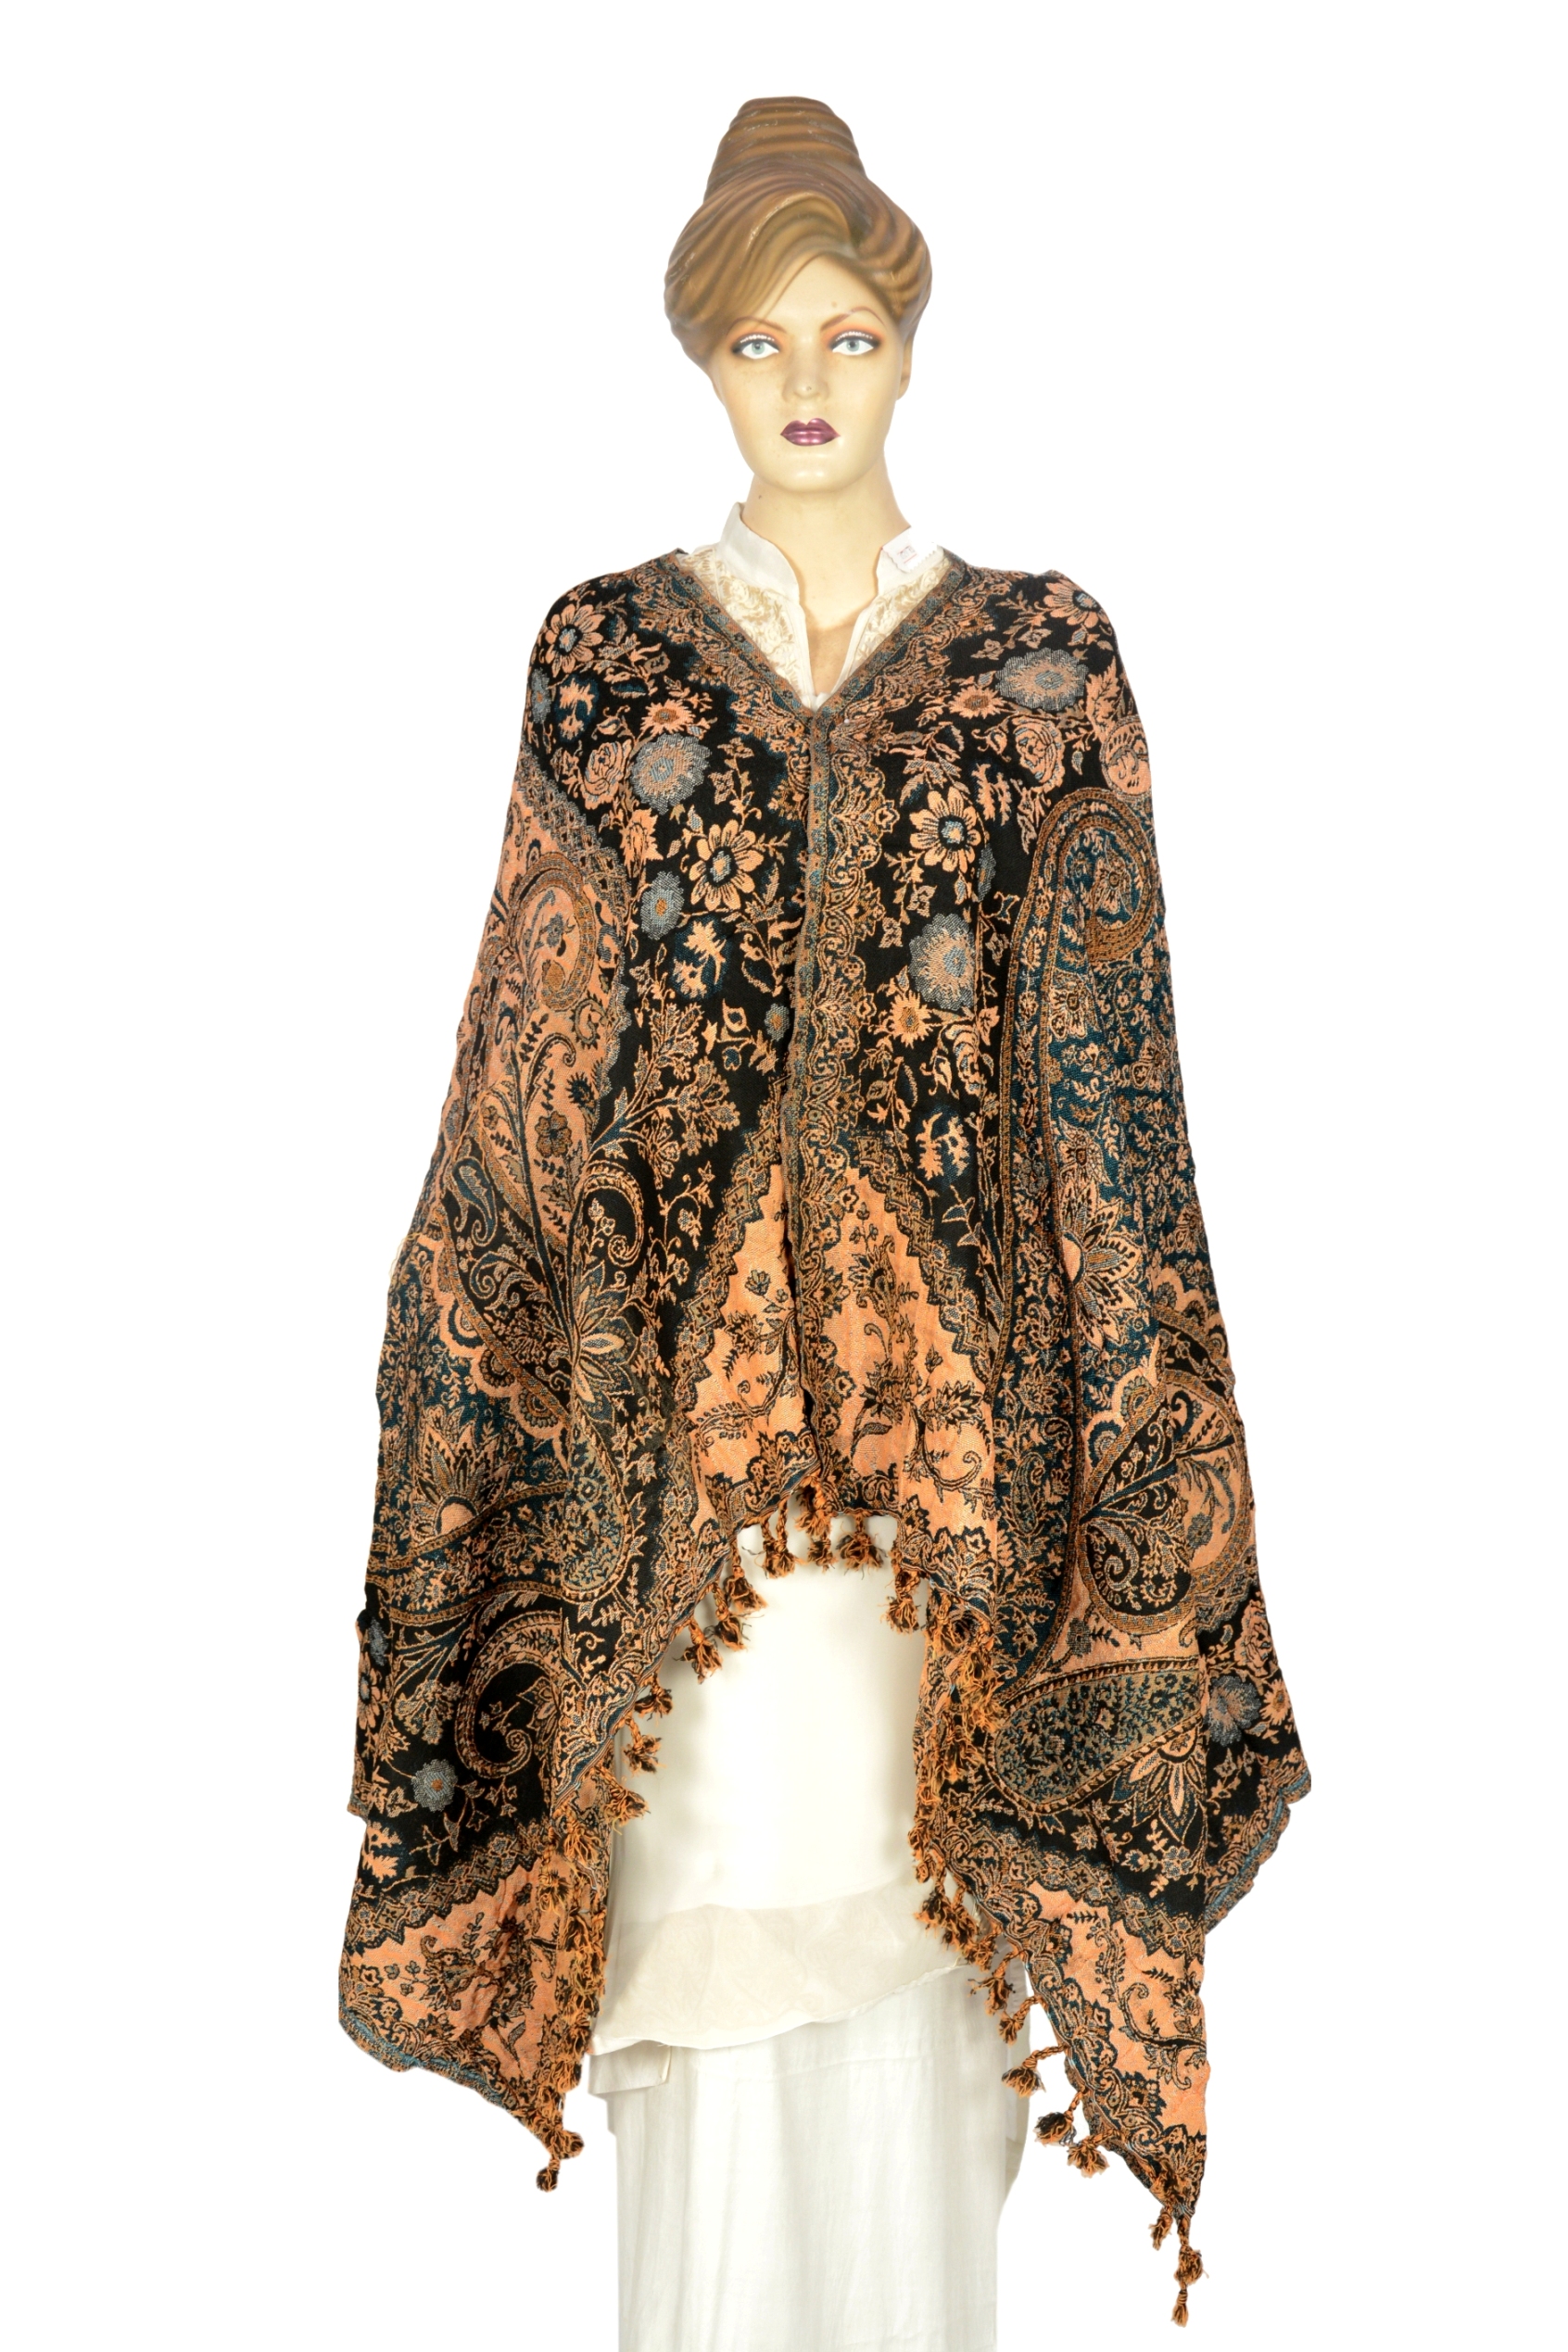 Buy Saffanah Printed Winter Shawl Online @ ₹235 from ShopClues